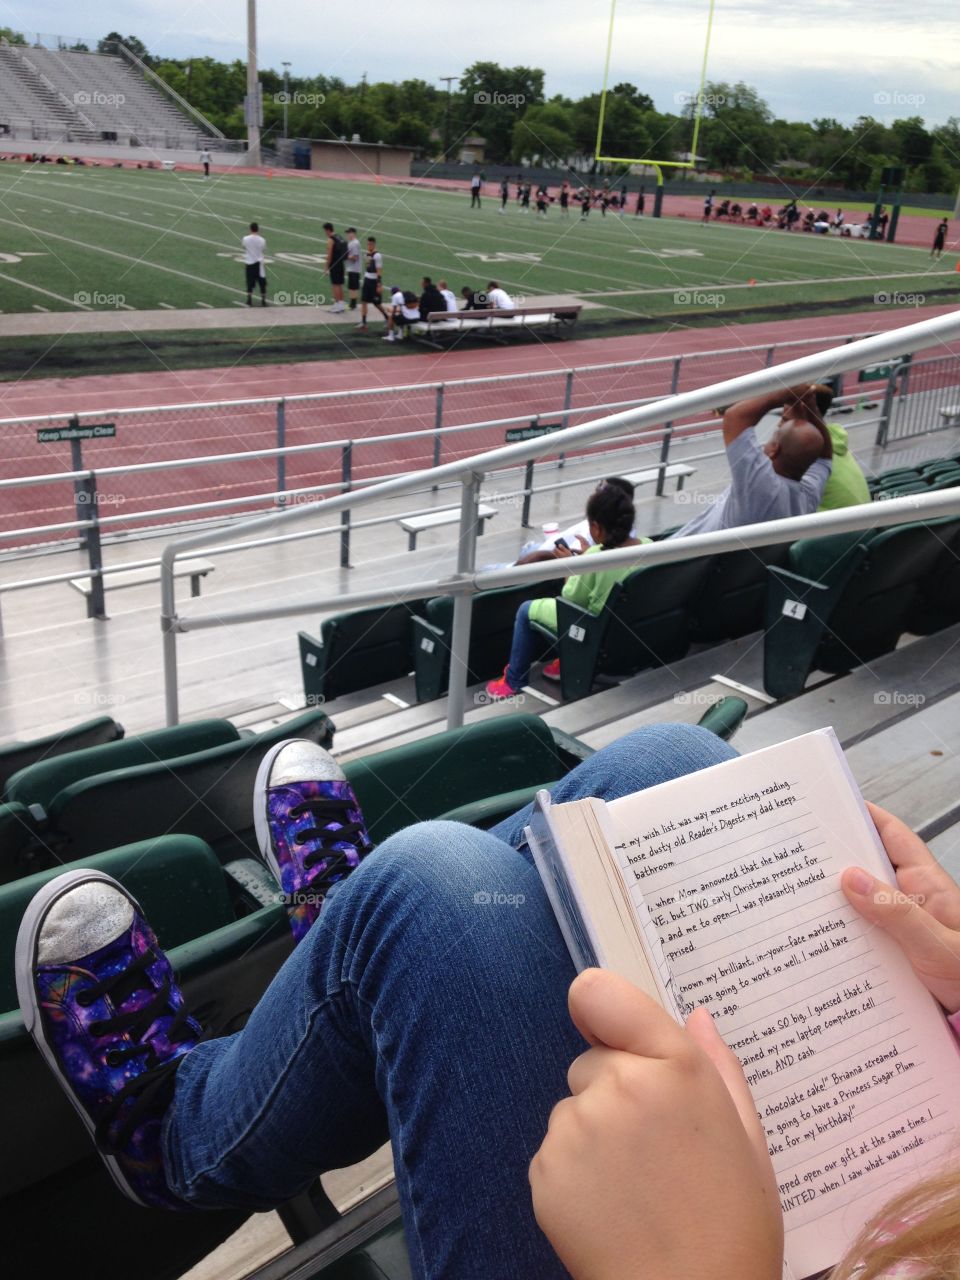 Football and reading. A girl reading a book and watching 7 on 7 football